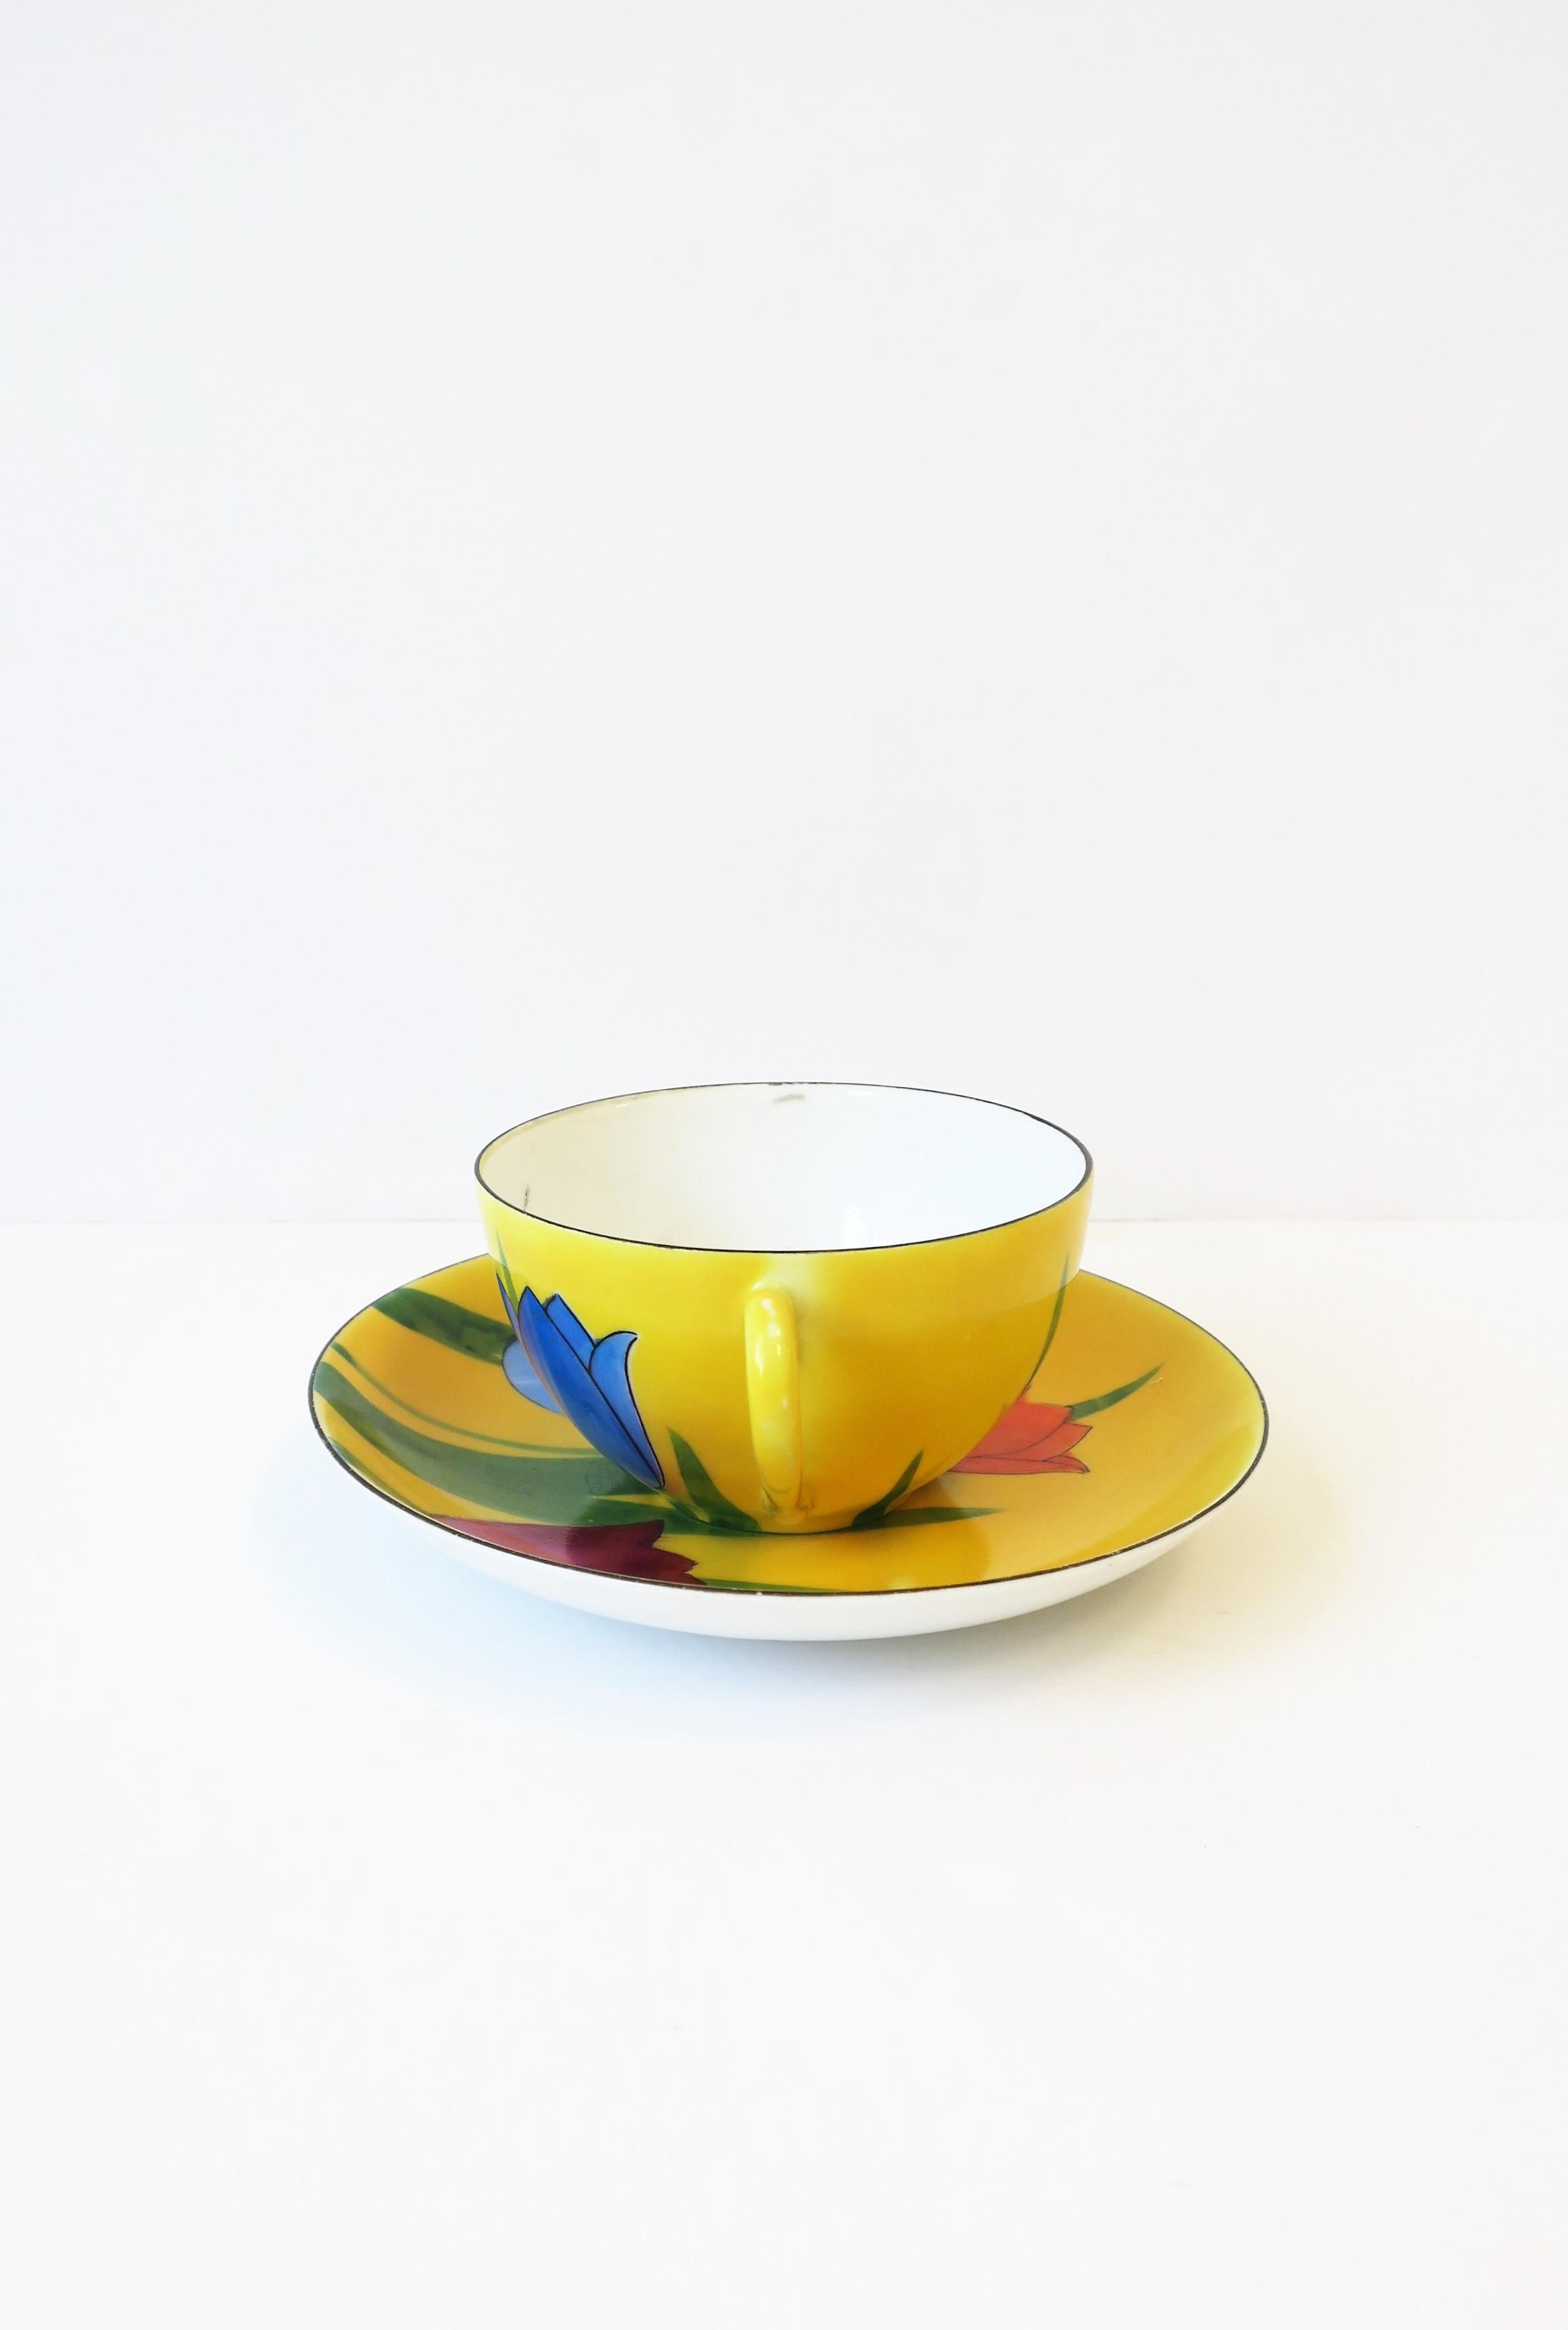 20th Century Yellow Porcelain Coffee or Tea Cup Saucer Set with Tulip Flowers For Sale